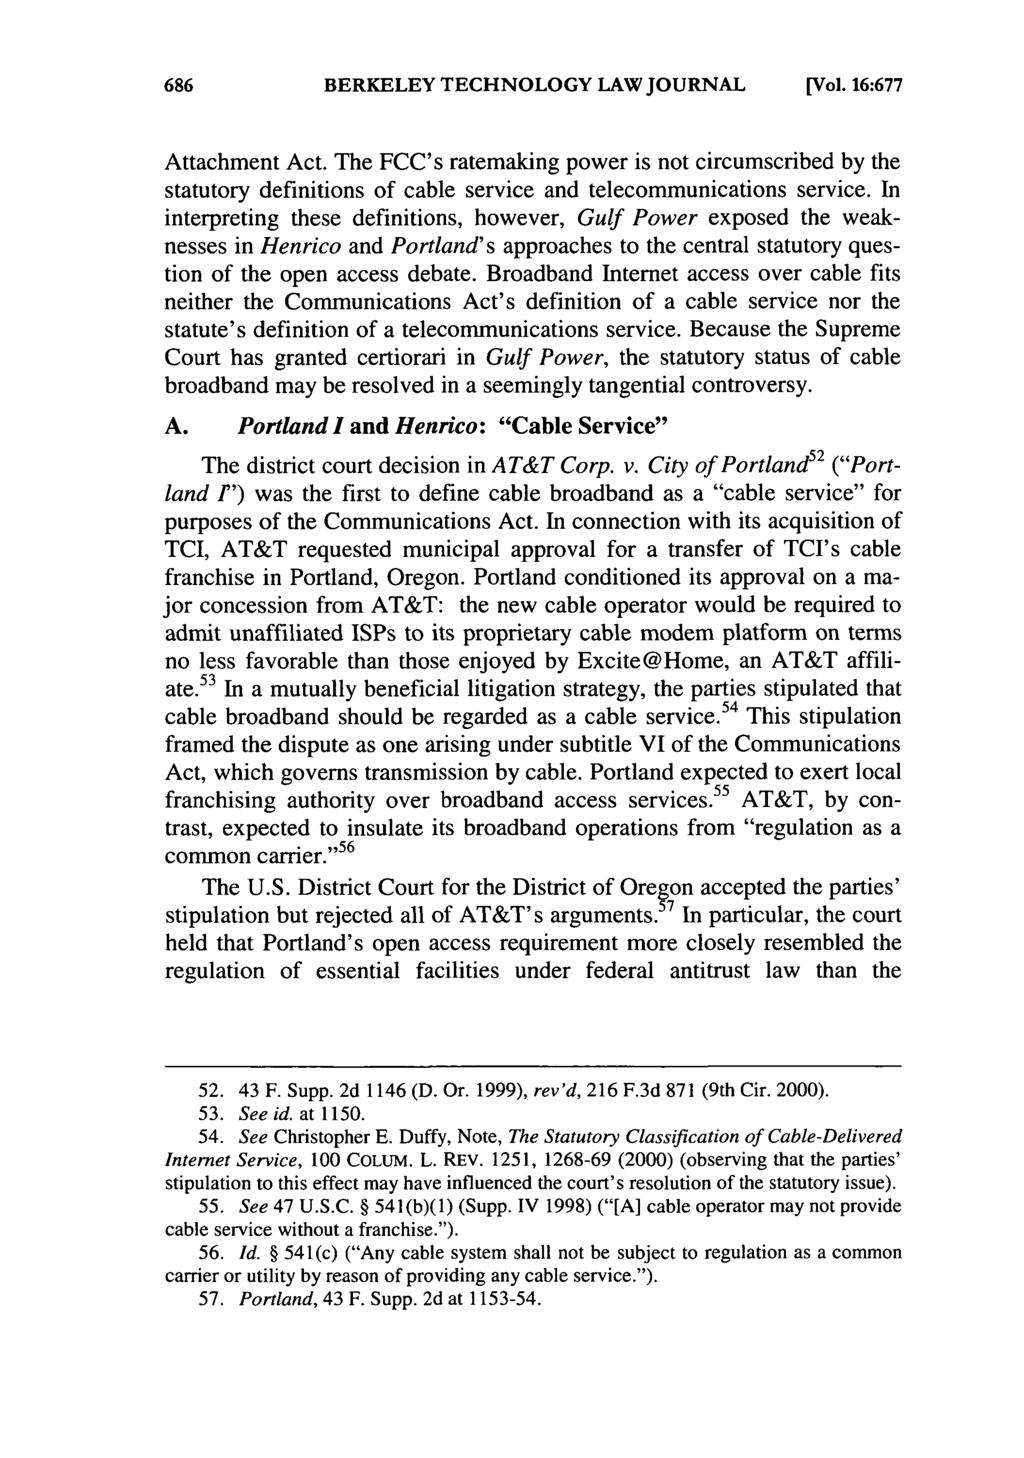 BERKELEY TECHNOLOGY LAW JOURNAL [Vol. 16:677 Attachment Act. The FCC's ratemaking power is not circumscribed by the statutory definitions of cable service and telecommunications service.